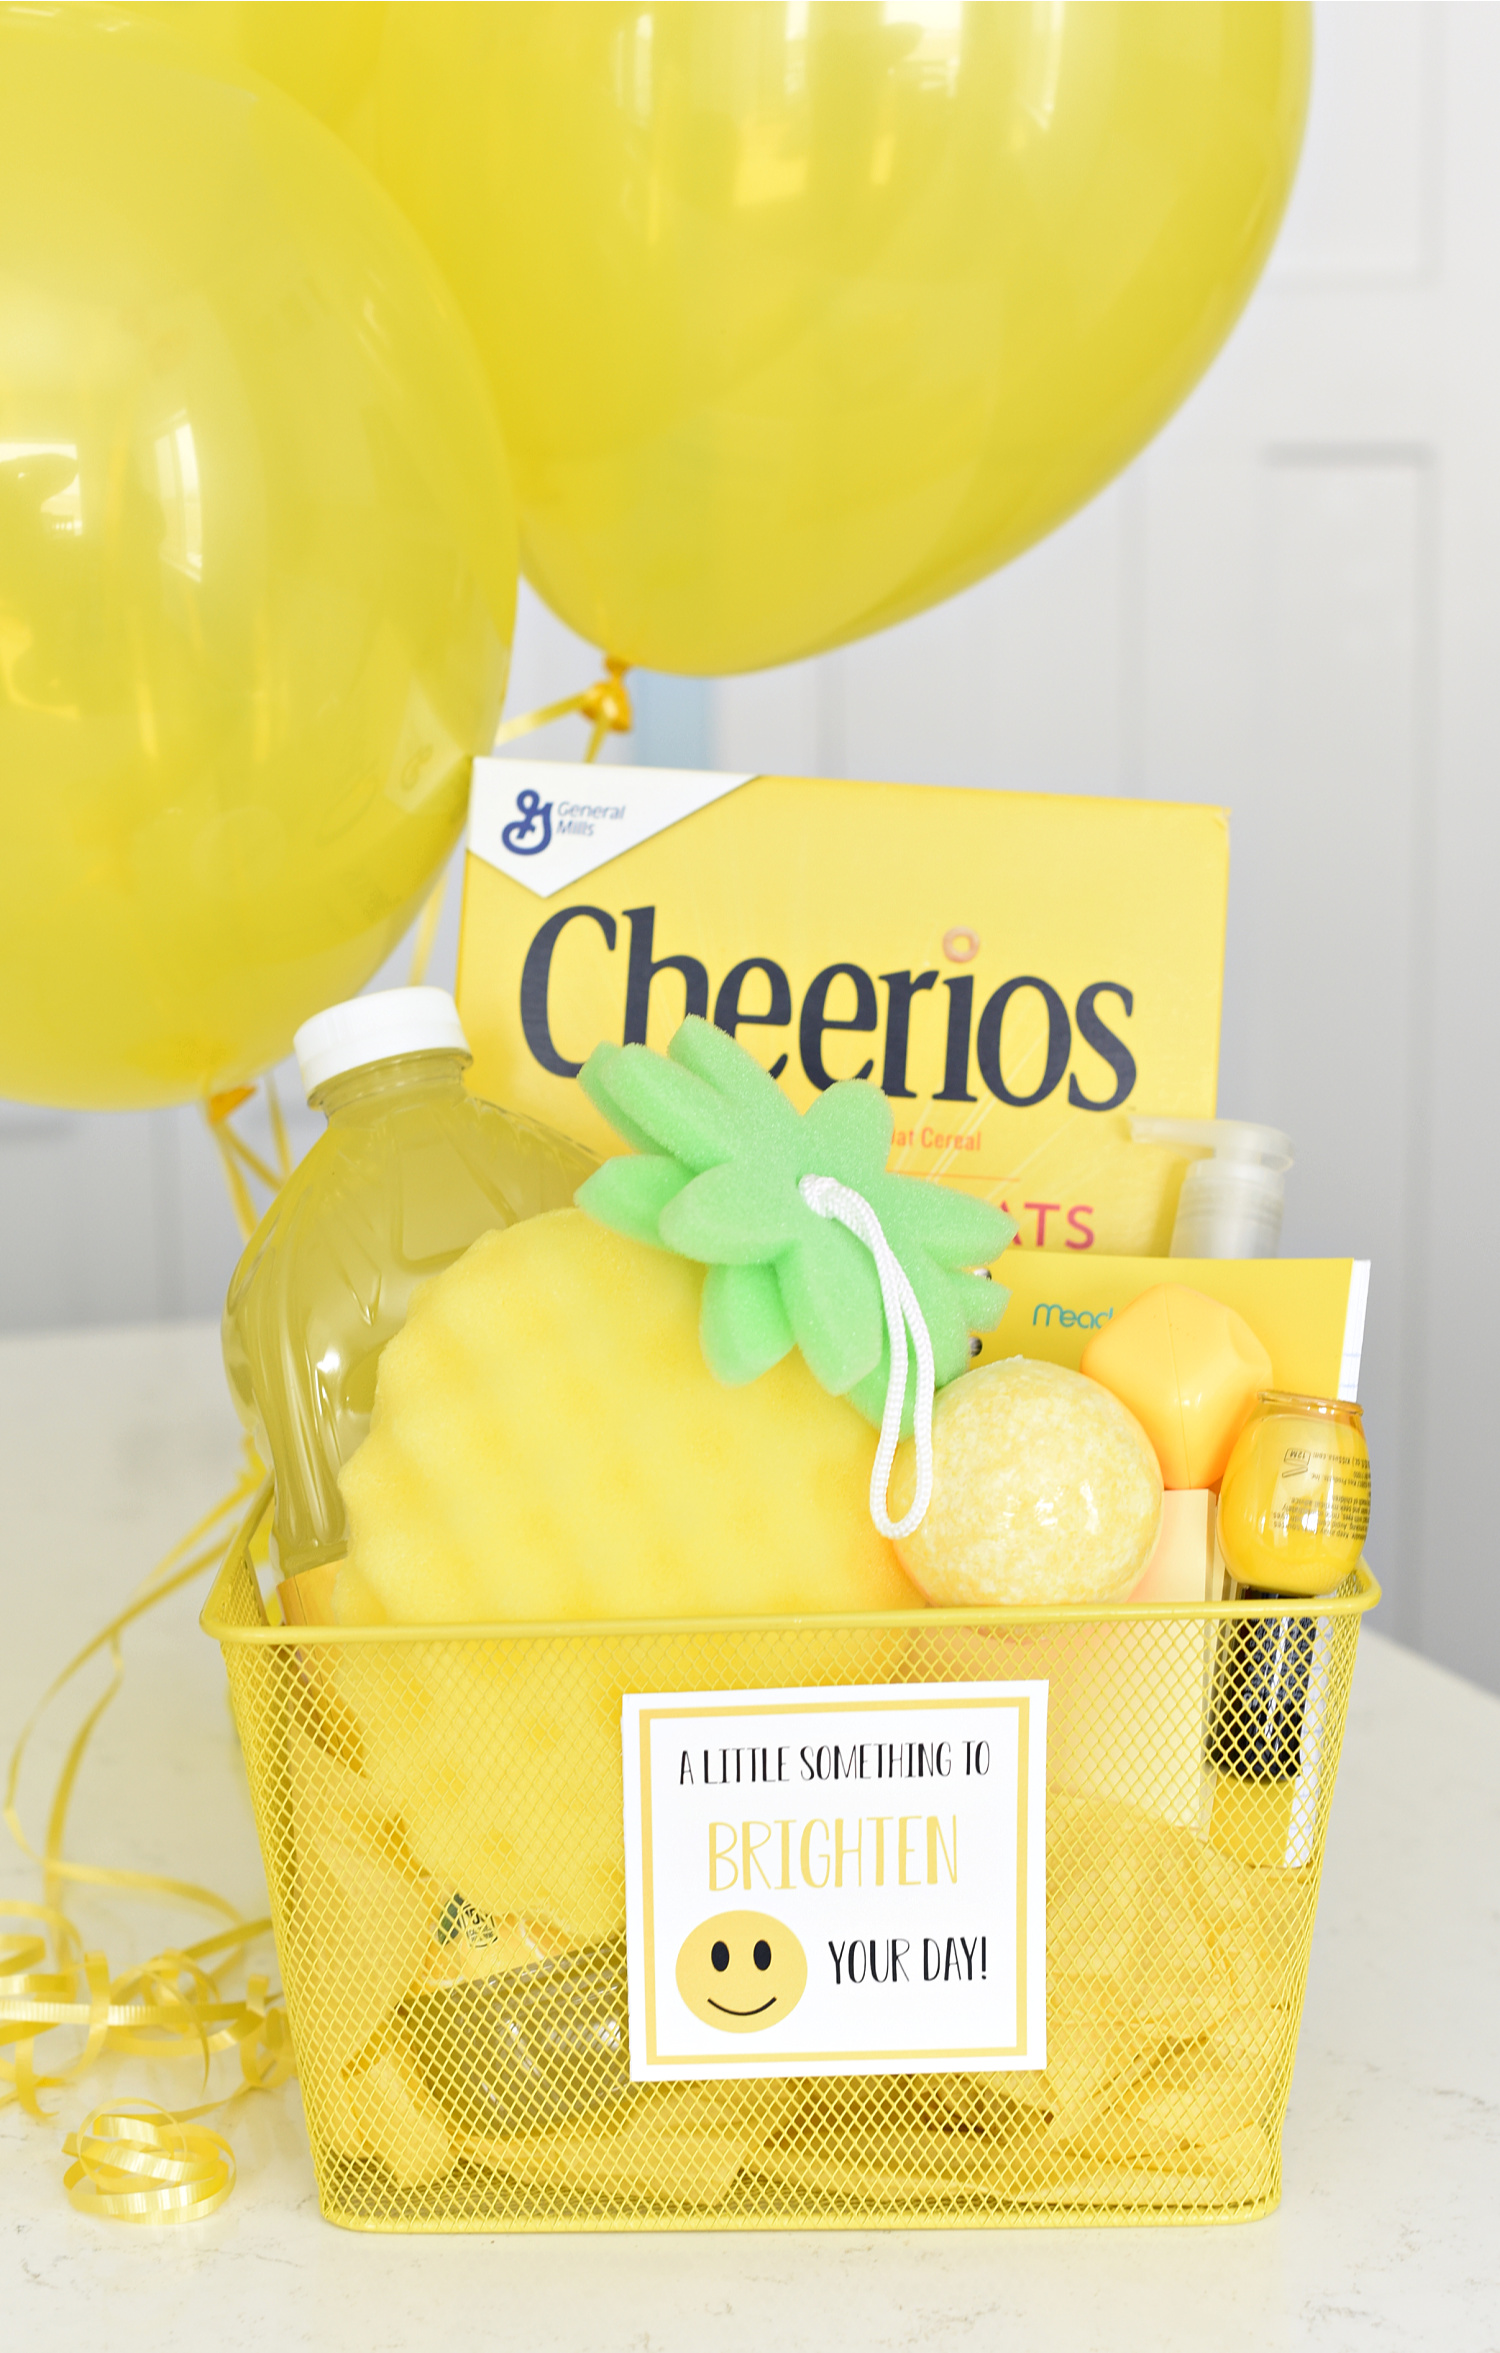 Cheer Up Gifts-This fun yellow themed gift basket is a great way to brighten someone's day! #gifts #giftideas #smile #cheerupgift #giftbaskets